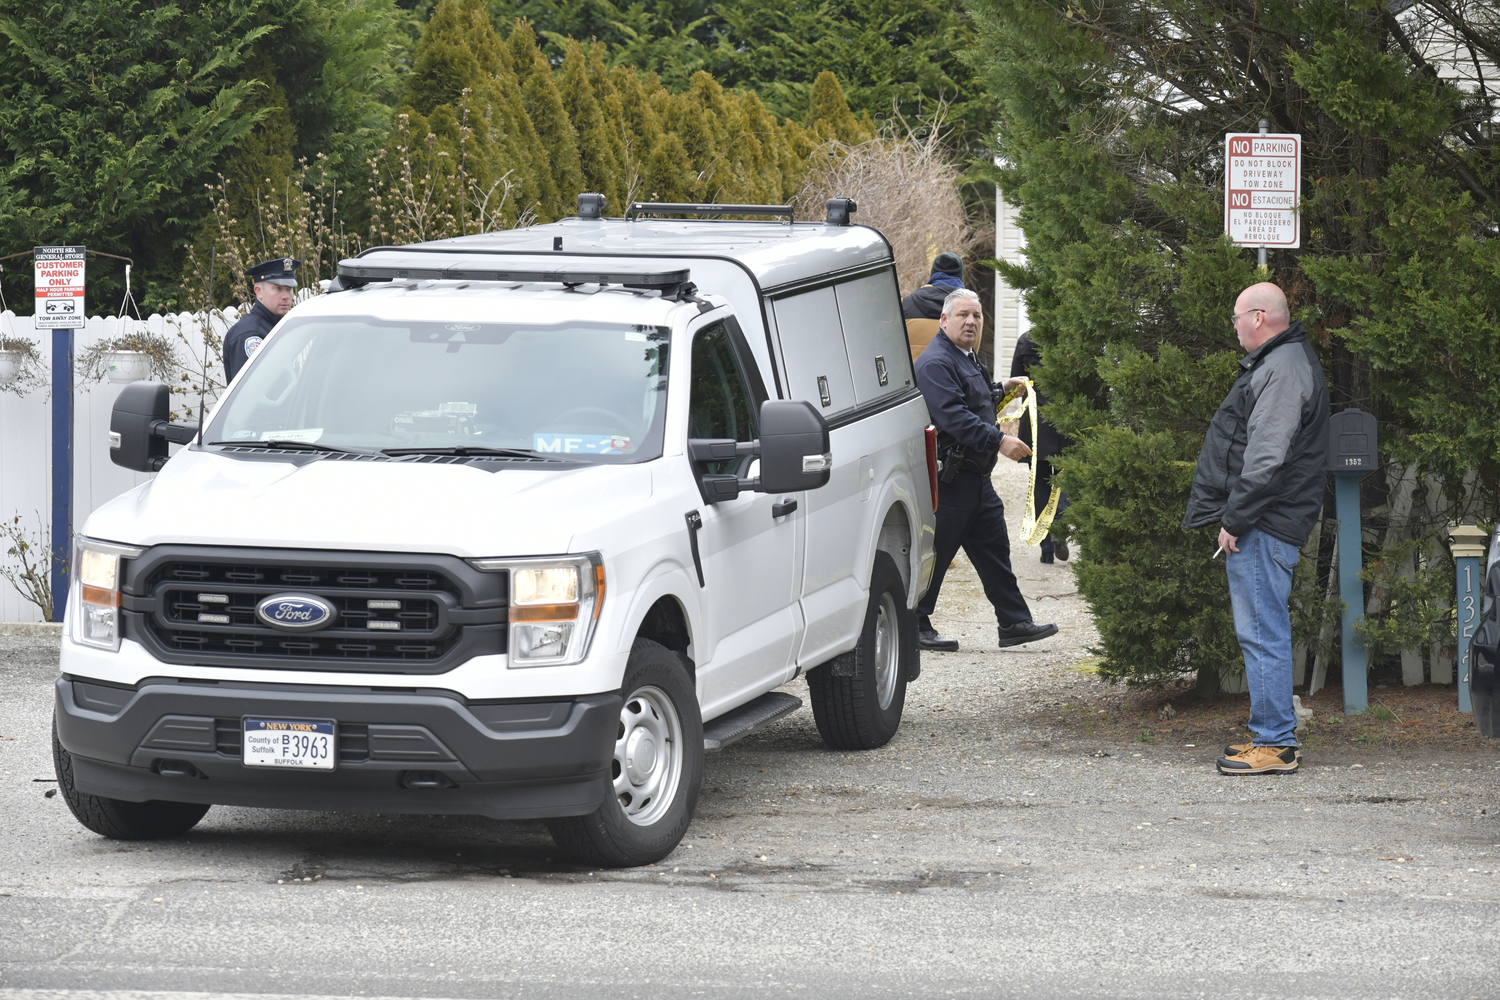 The Medical Examiner arrives at the private residence in North Sea where the body of missing man James Thomas Lee was found on Tuesday afternoon.  DANA SHAW